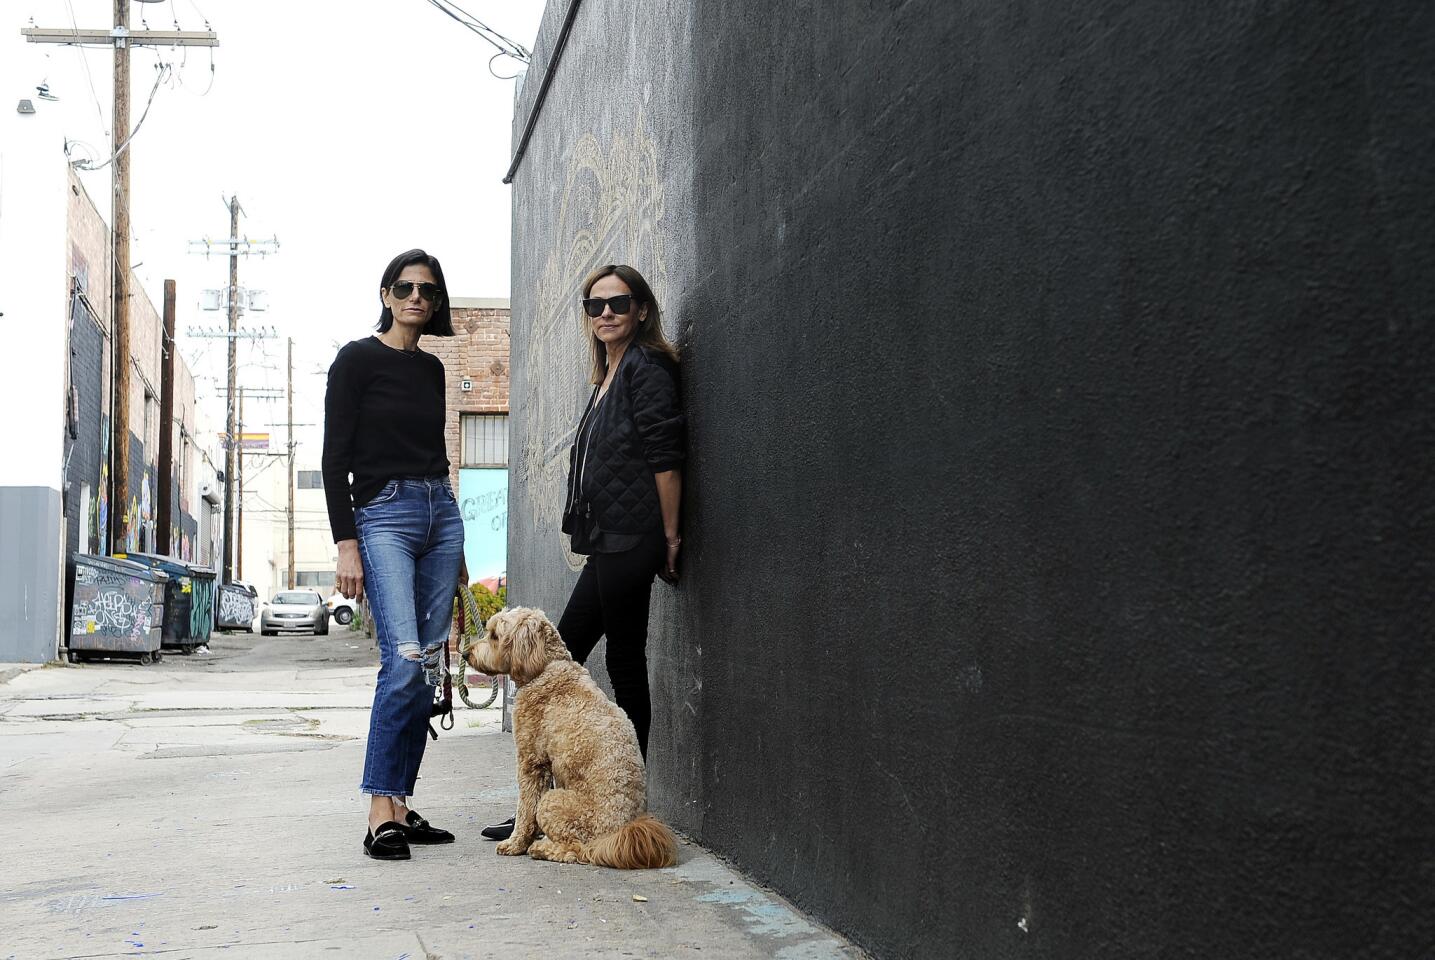 Maryam and Majan Malakpour are sisters and owners of the luxury brand Newbark. Here they are seen with Peaches.